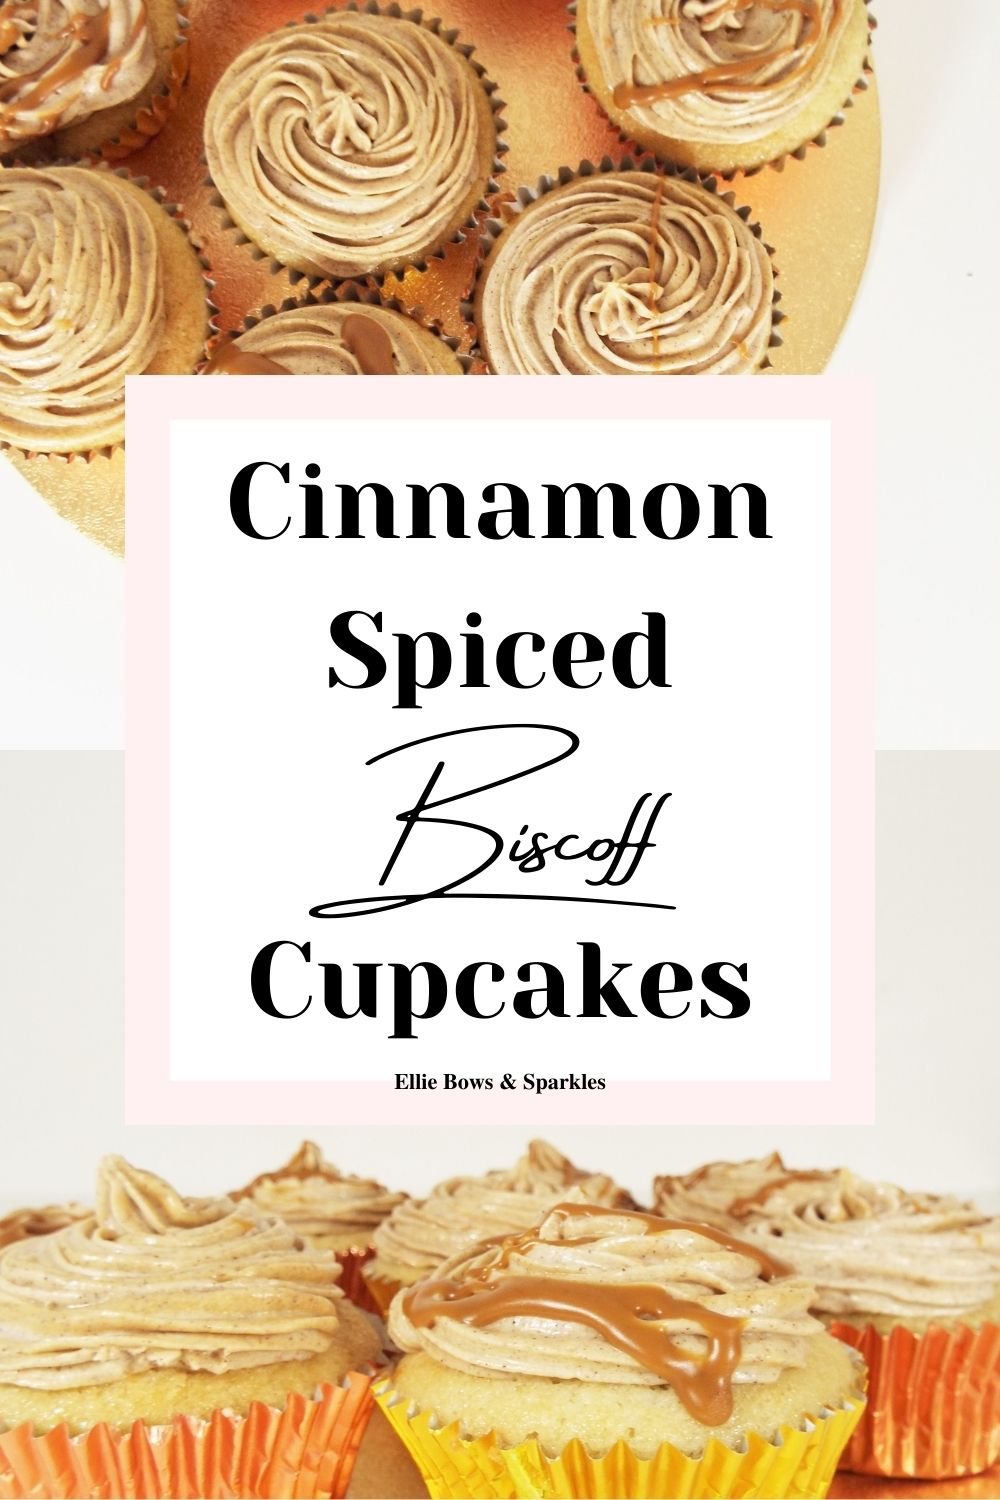 Pinterest pin with large, central white title box, with pink boarder, reading Cinnamon Spiced Biscoff Cupcakes, in bold and handwritten font. A birds eye view and side shot of the caramel coloured cupcakes fills the top and bottom of the background of the pin.